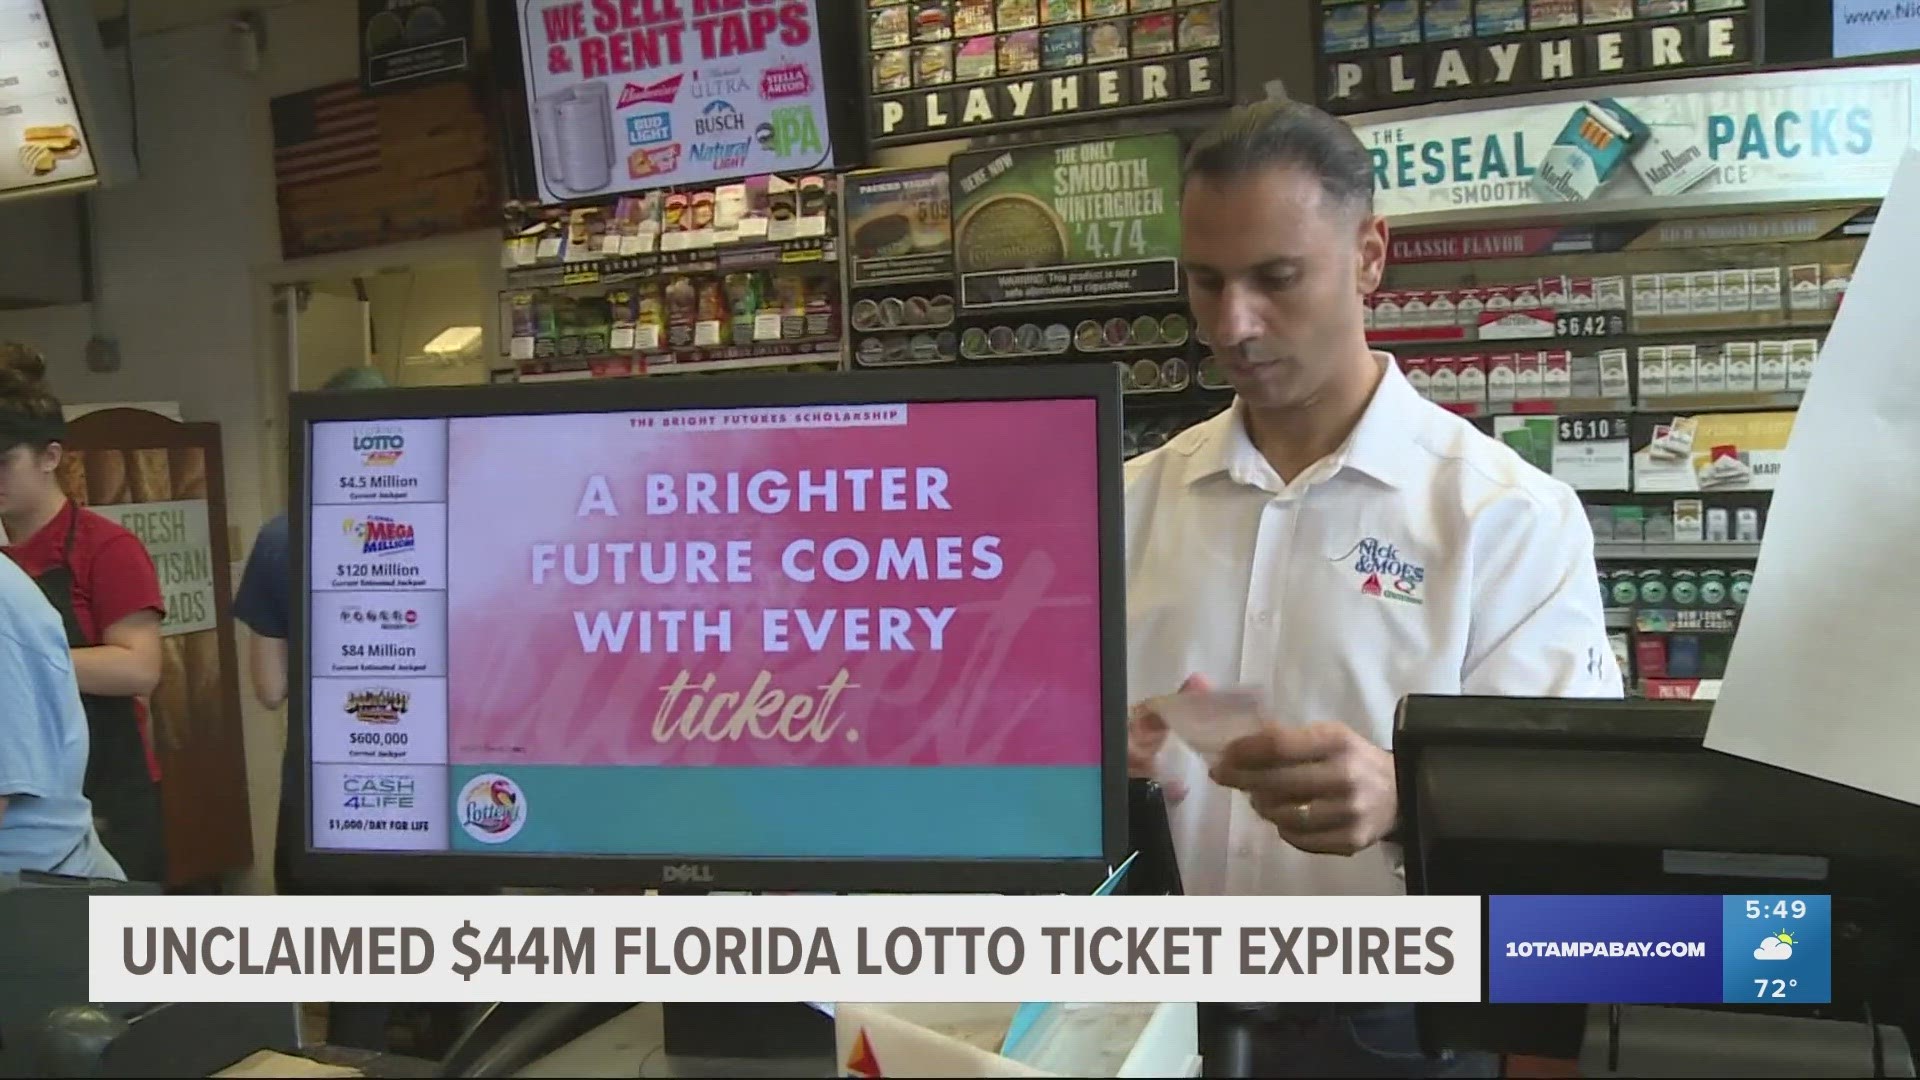 The Florida Lottery says the winning ticket was bought on June 13 in Kissimmee.